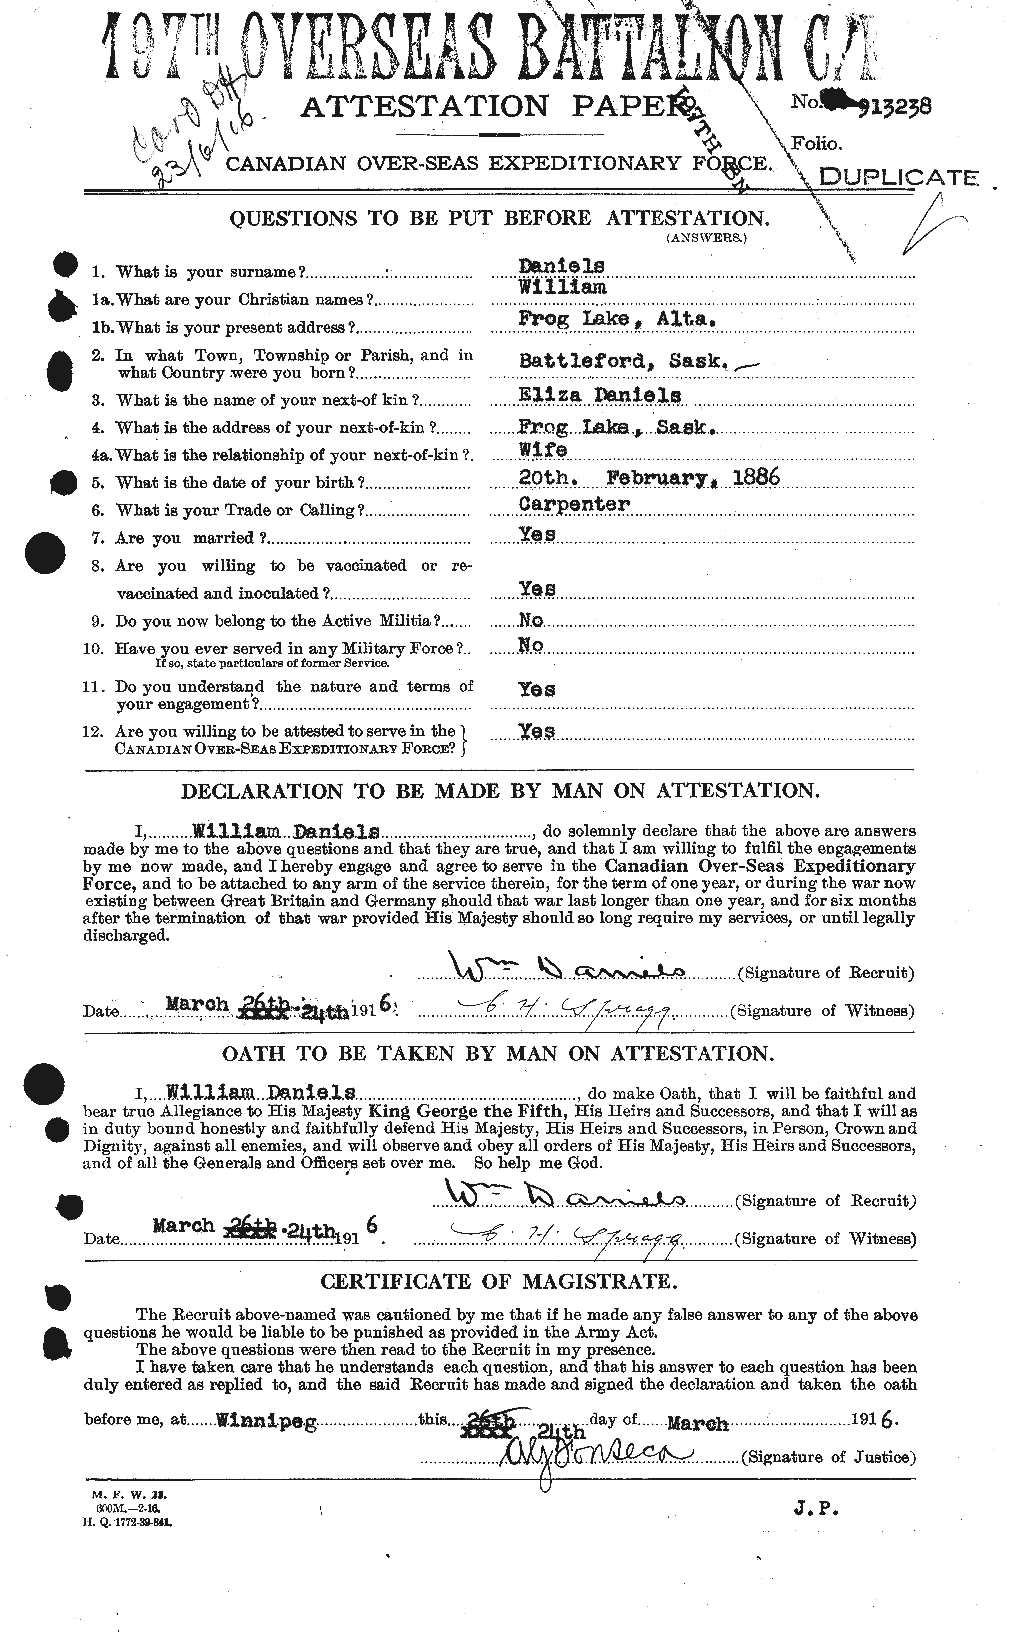 Personnel Records of the First World War - CEF 279690a